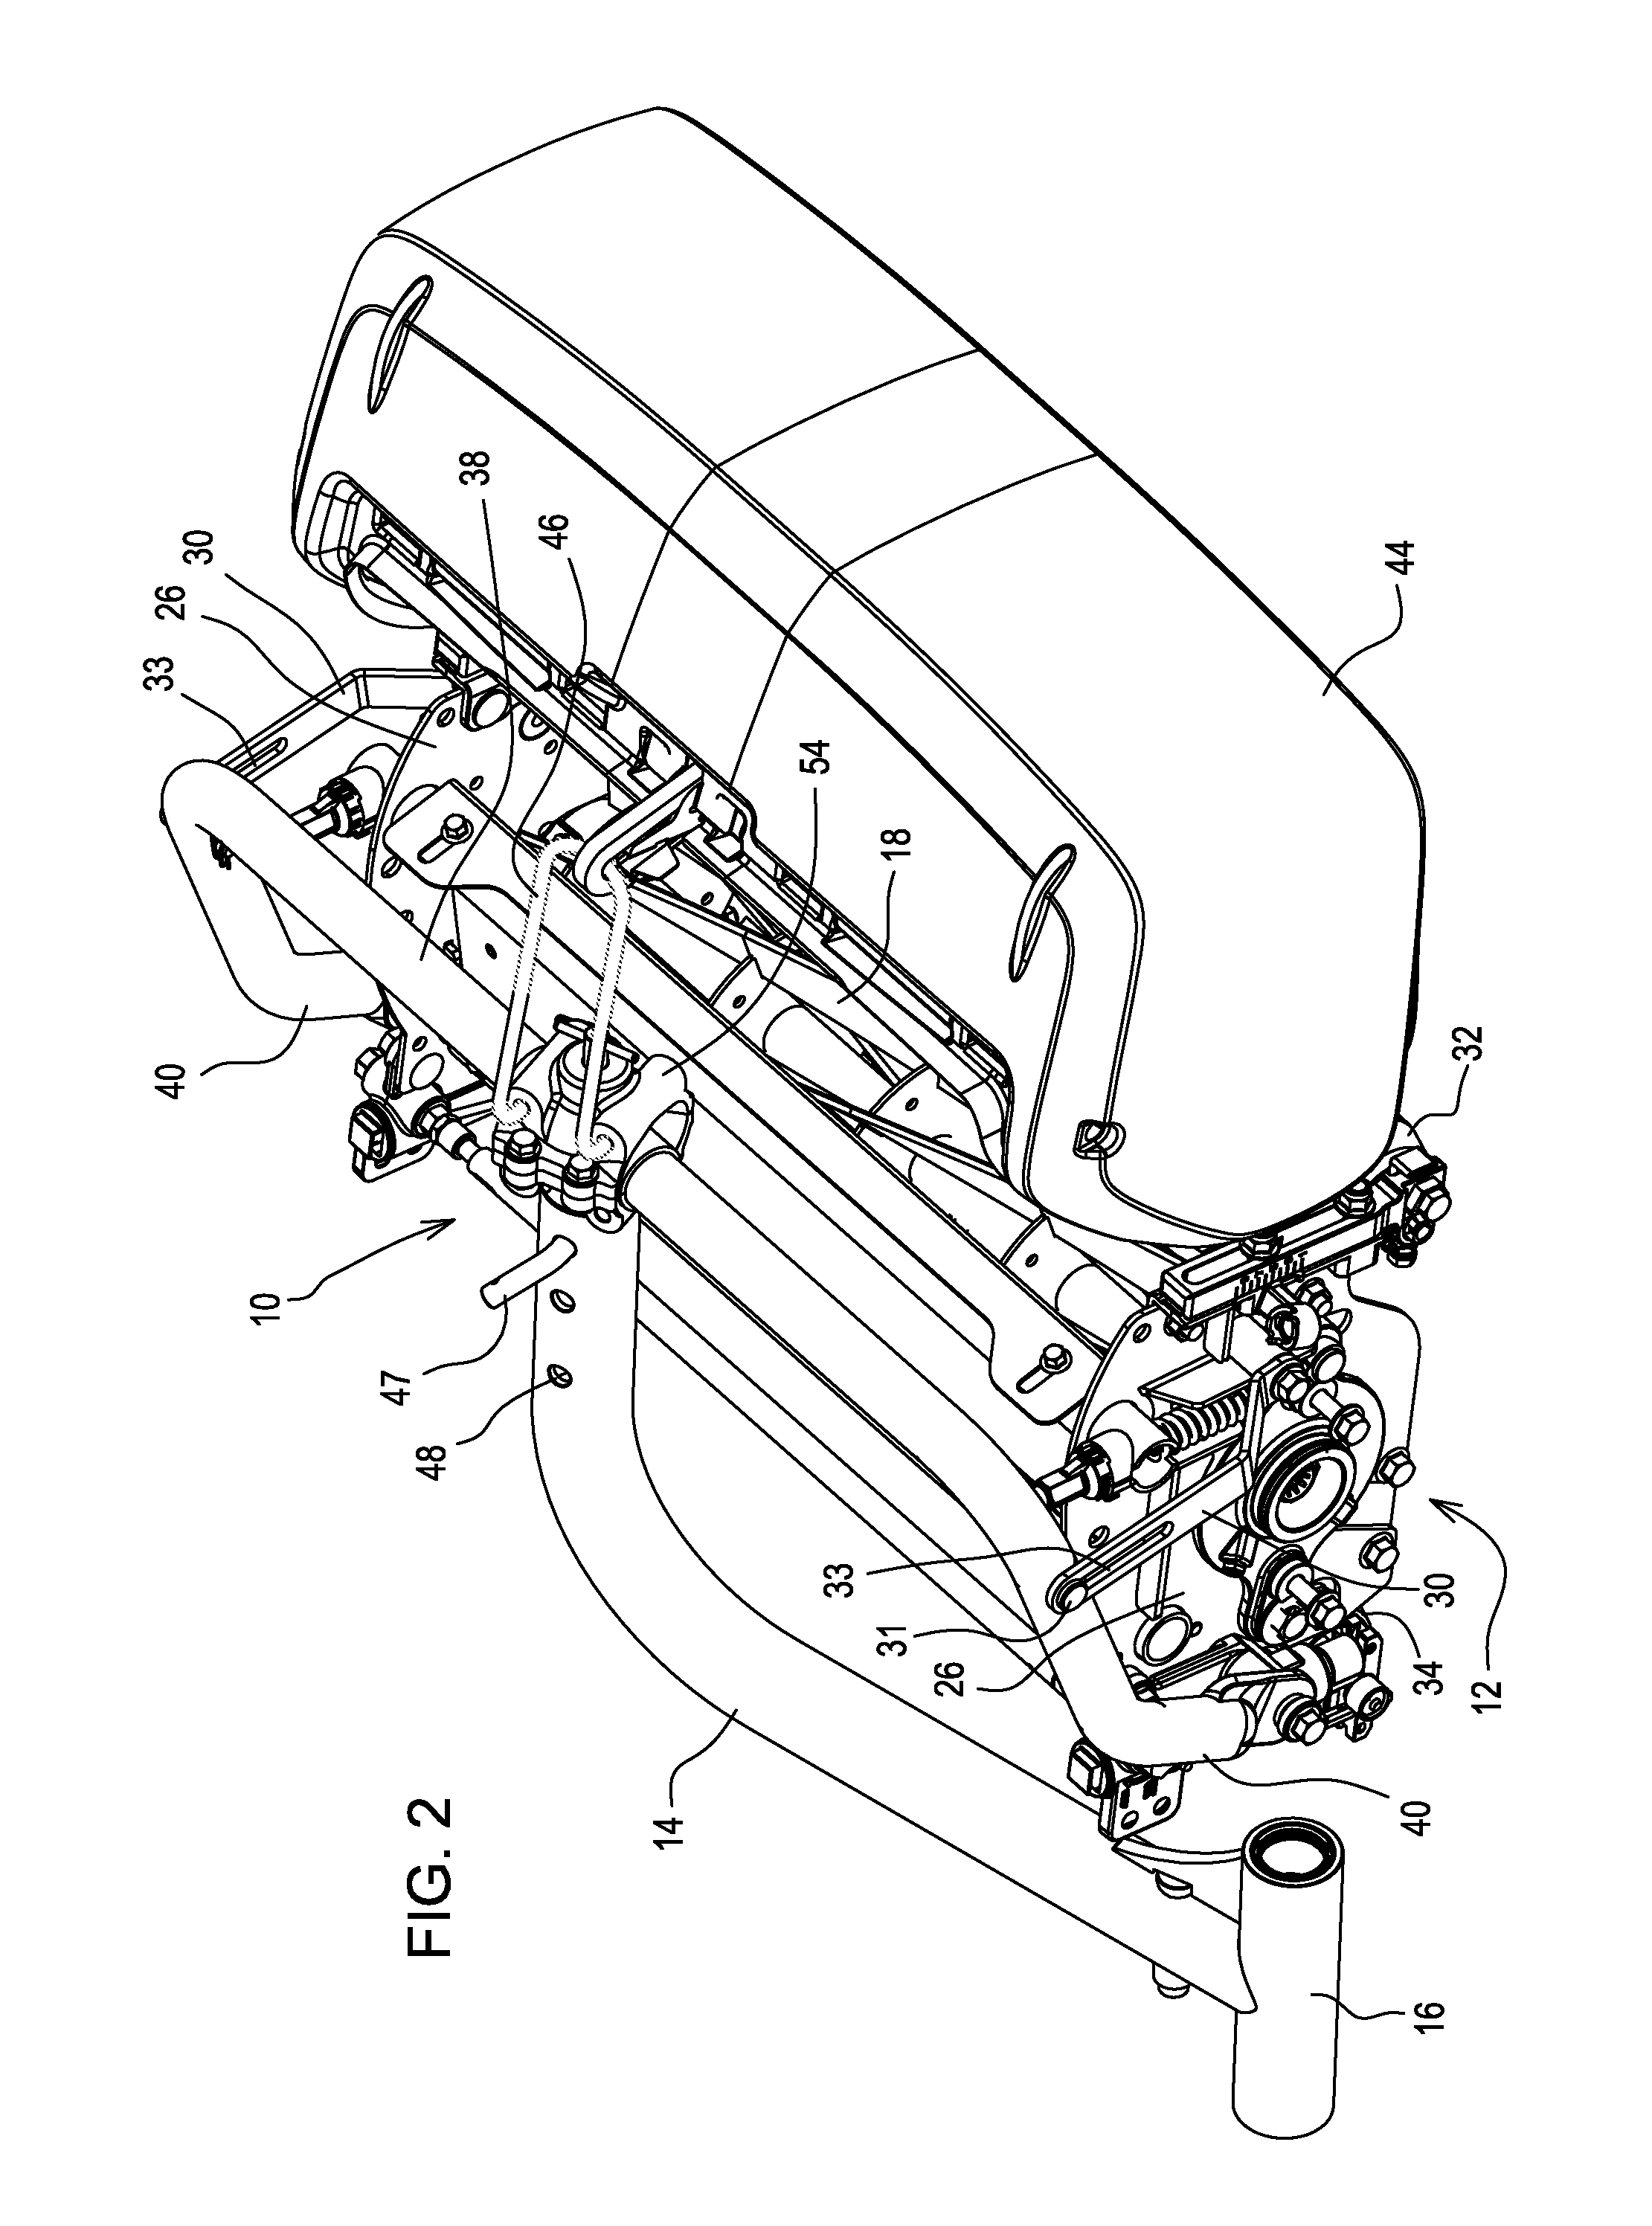 Cutting unit mounting device